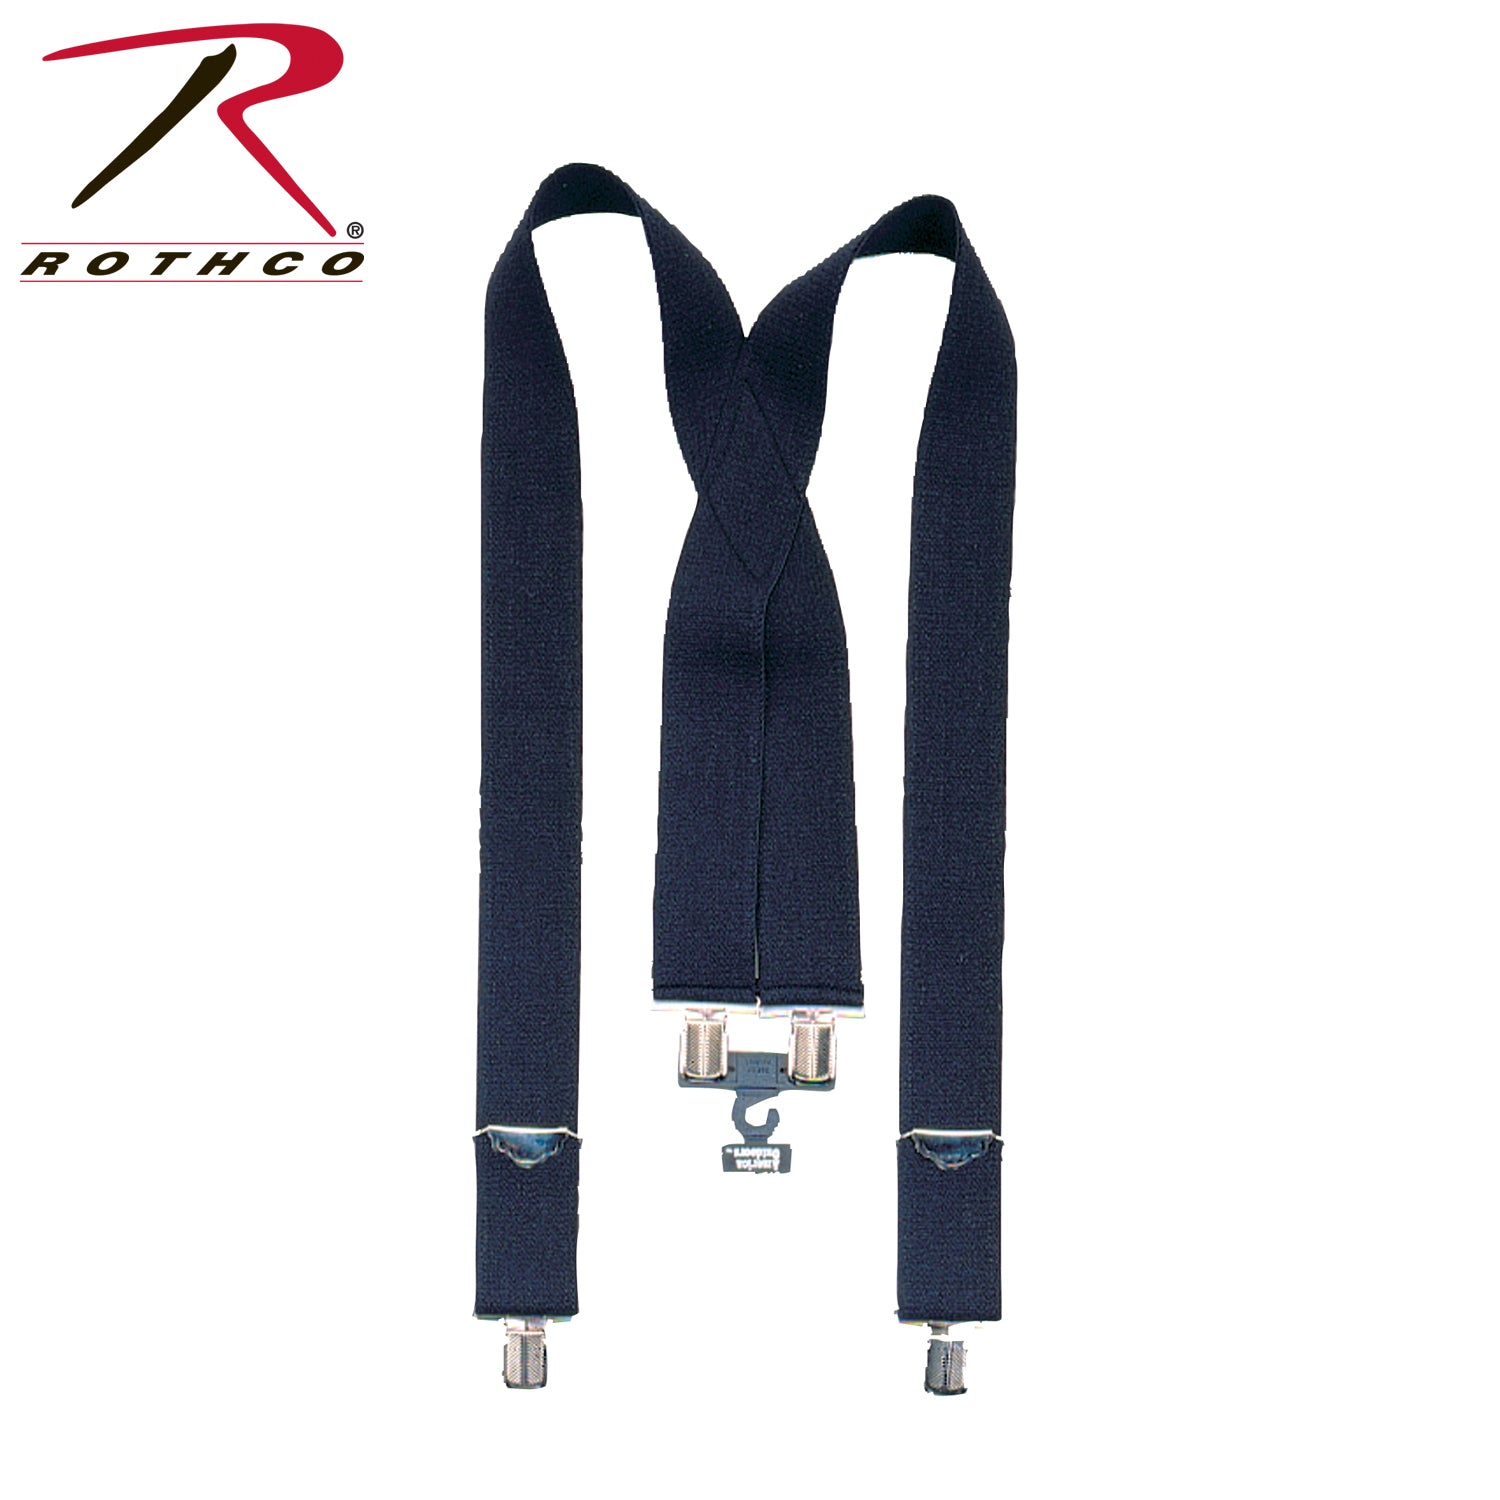 Rothco Adjustable Elastic X-Back Pant Suspenders - Tactical Choice Plus